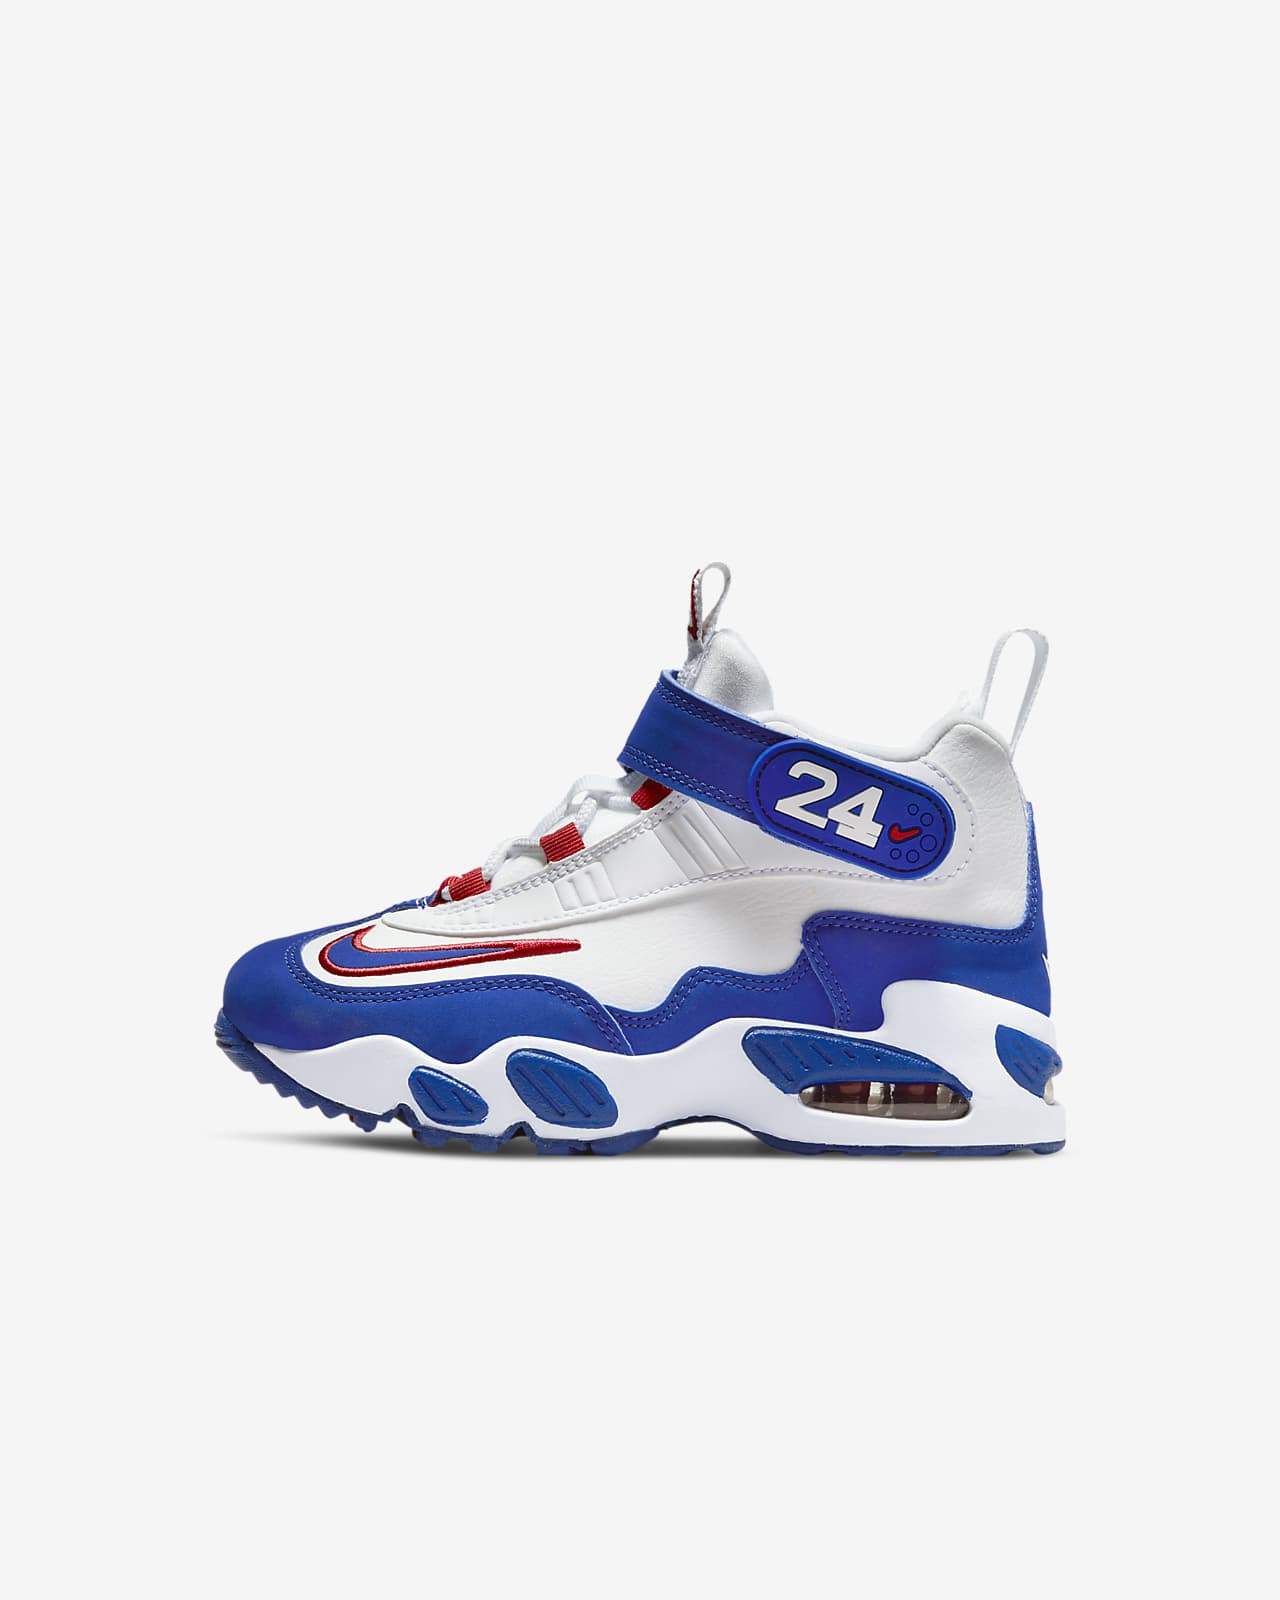 Nike Air Griffey Max 1 Little Shoes.